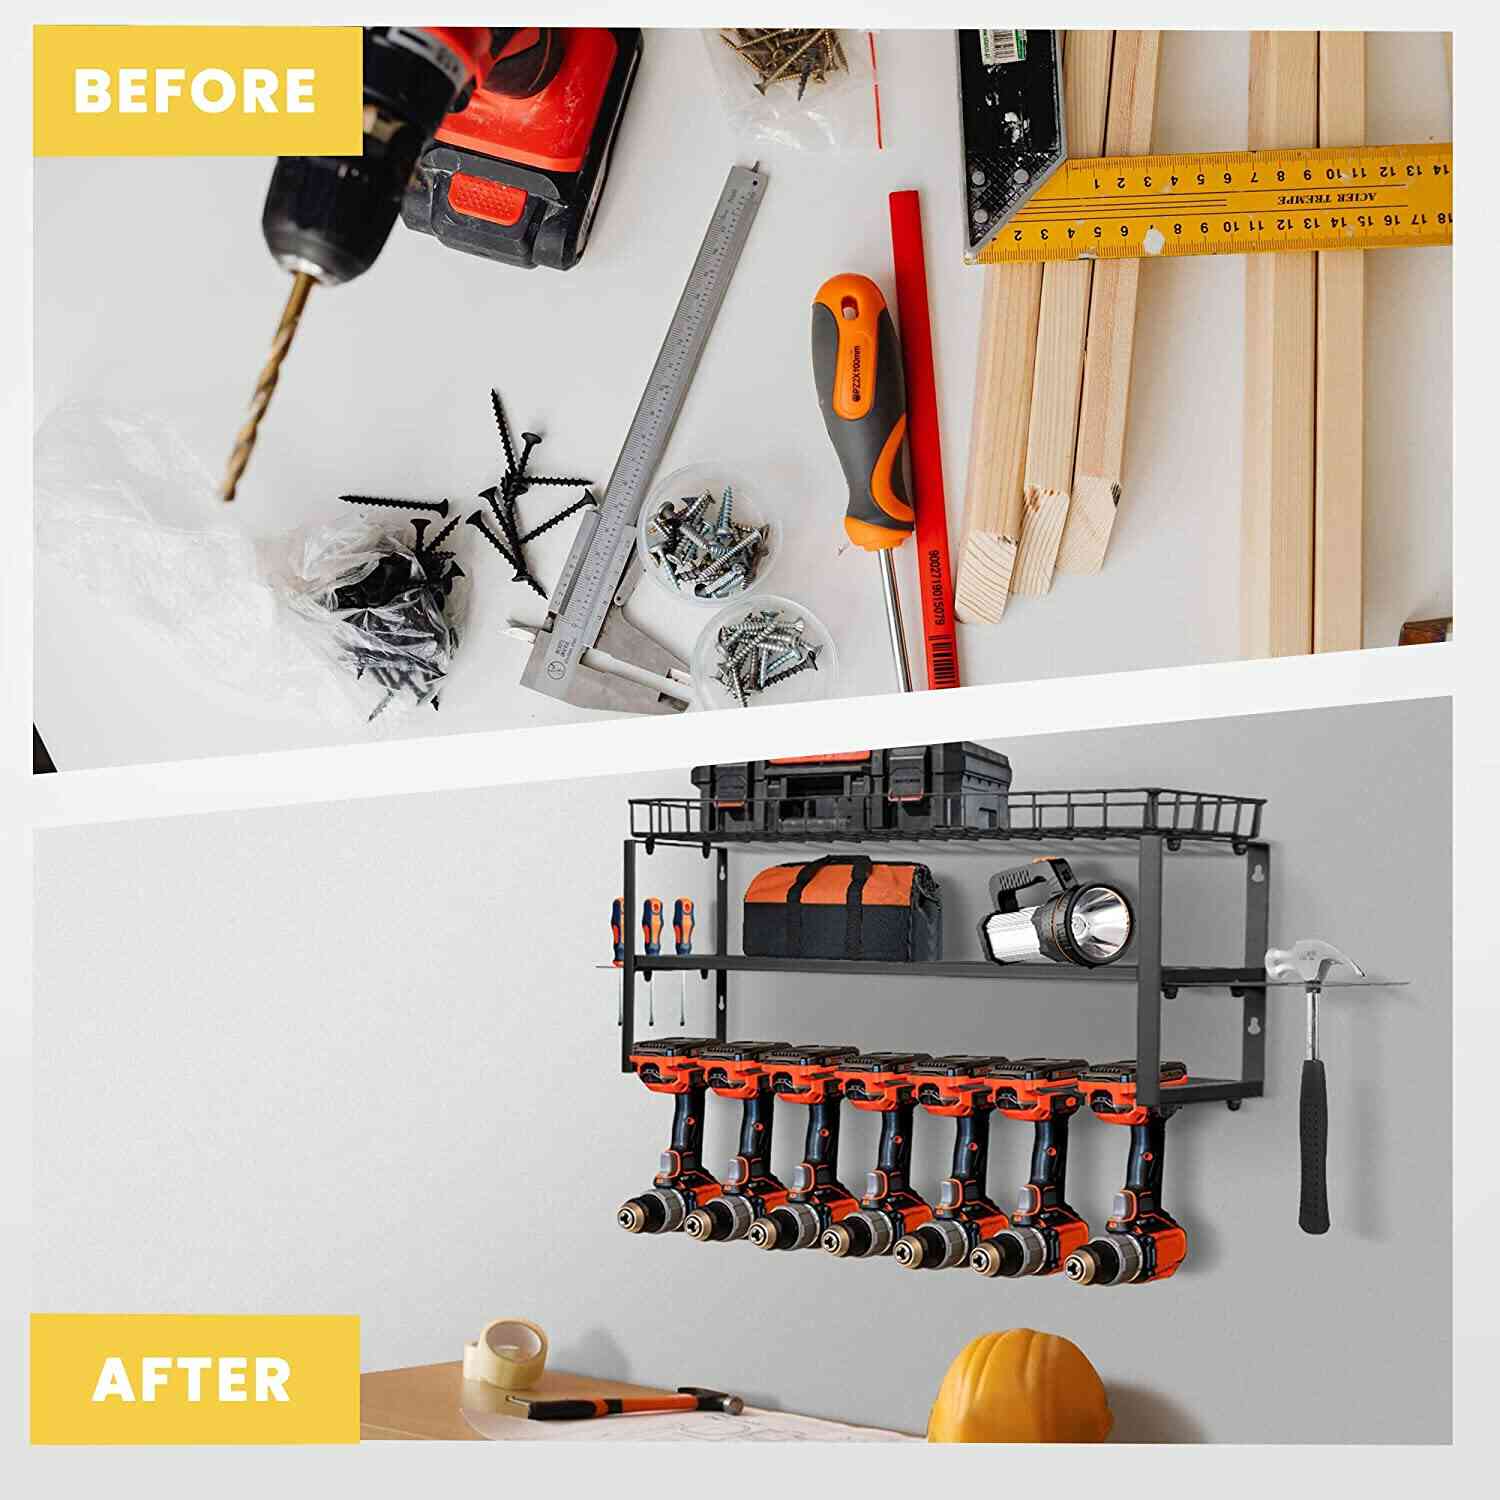 SPECSTAR Power Tool Organizer Wall Mount 3 Layers